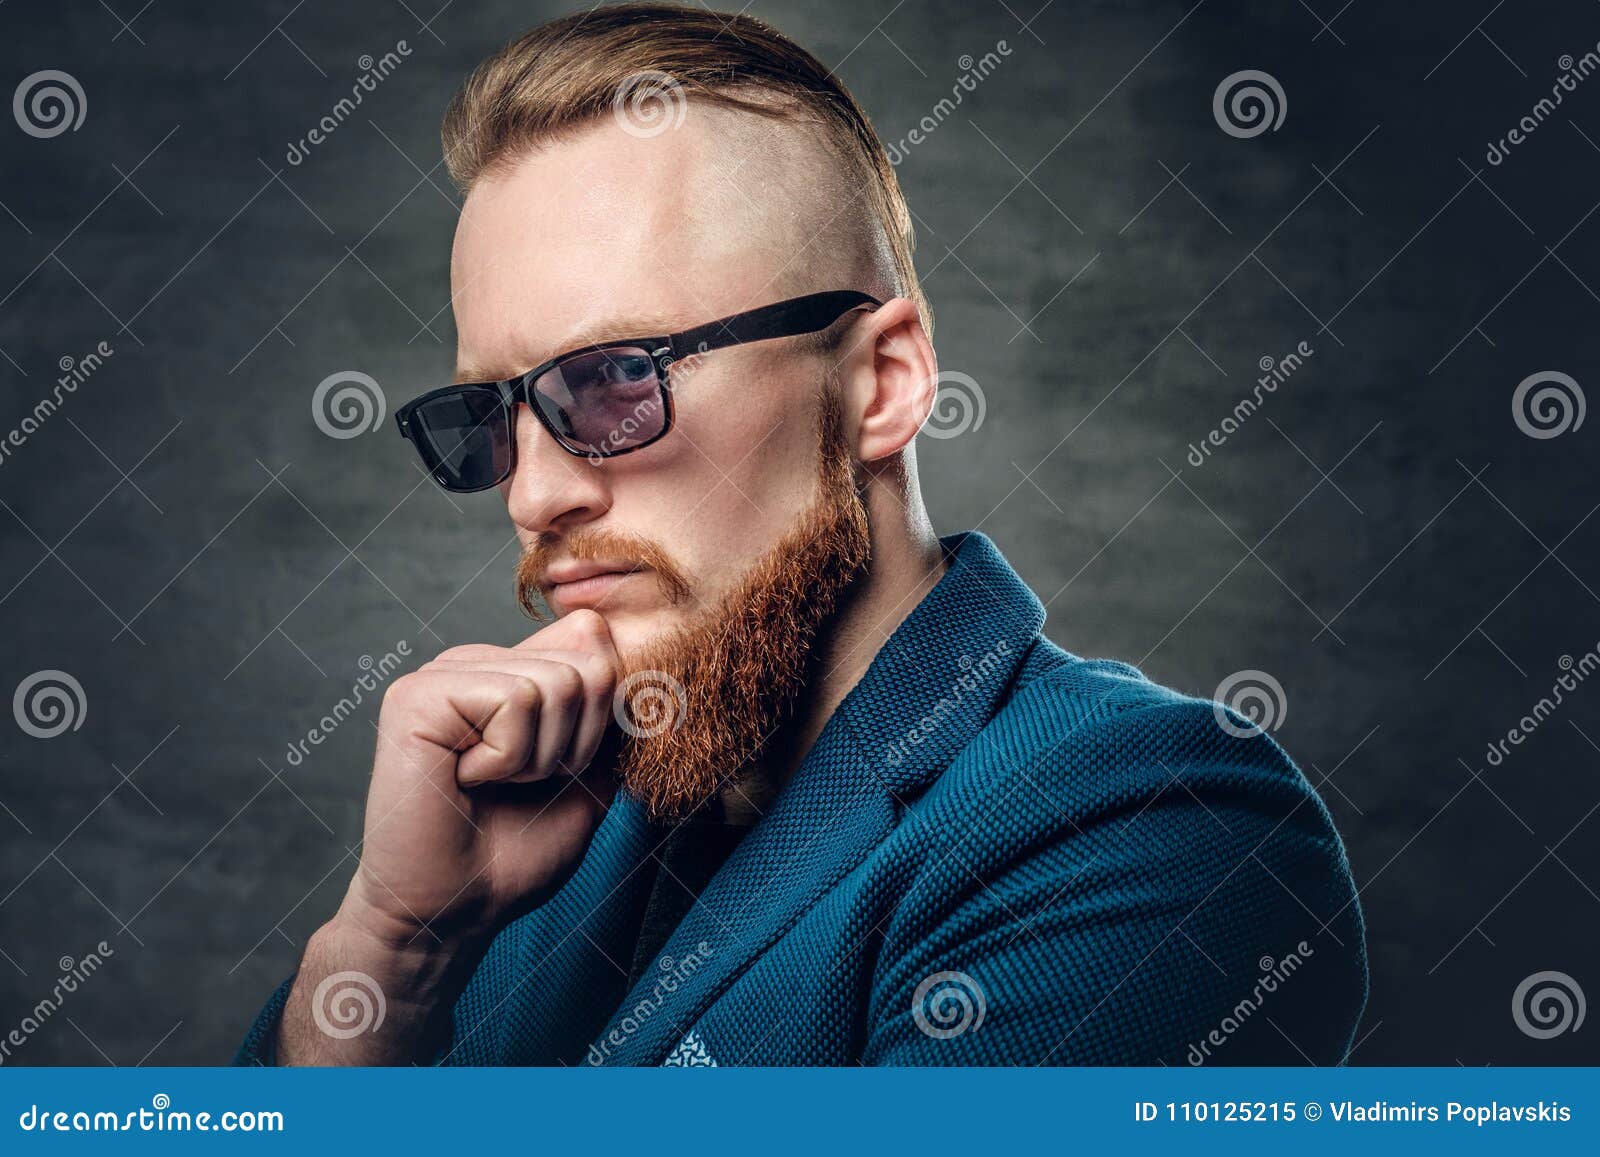 Redhead Bearded Hipster Male Dressed in a Blue Jacket. Stock Image ...